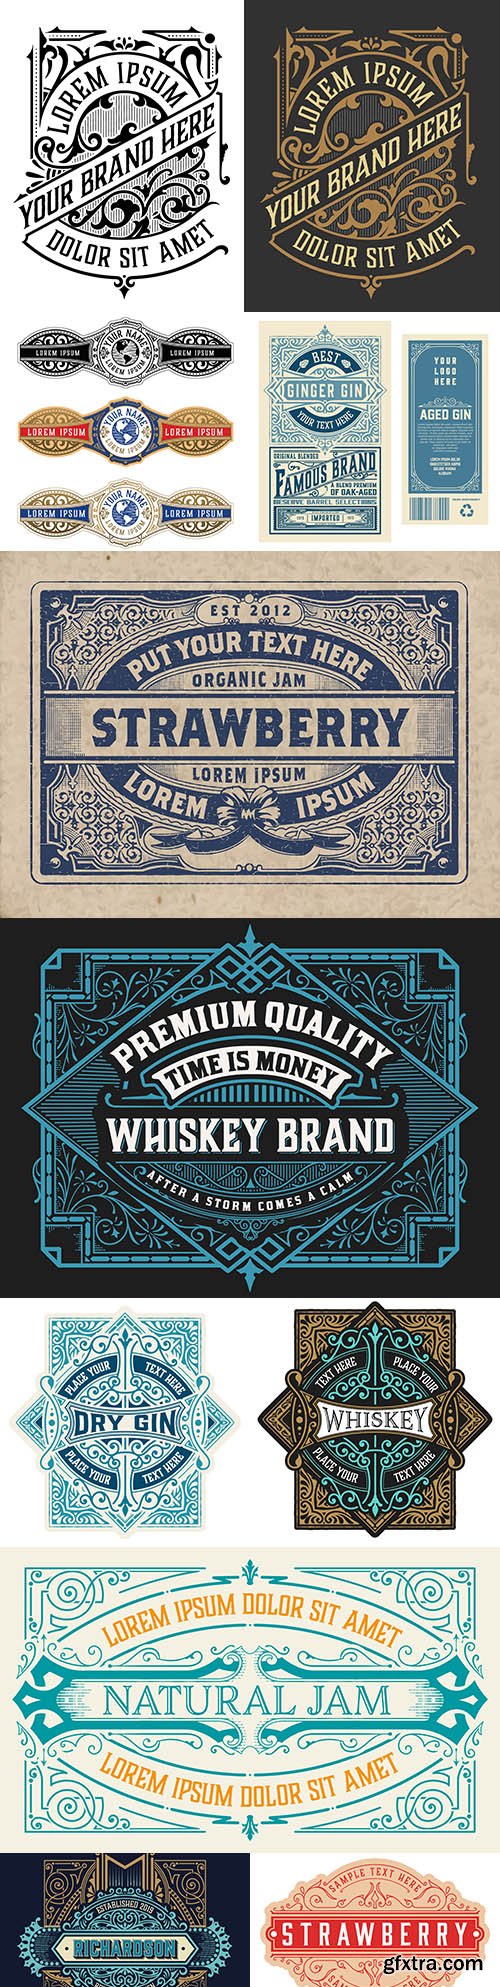 Vintage logo and etiquette template with detailed design 5